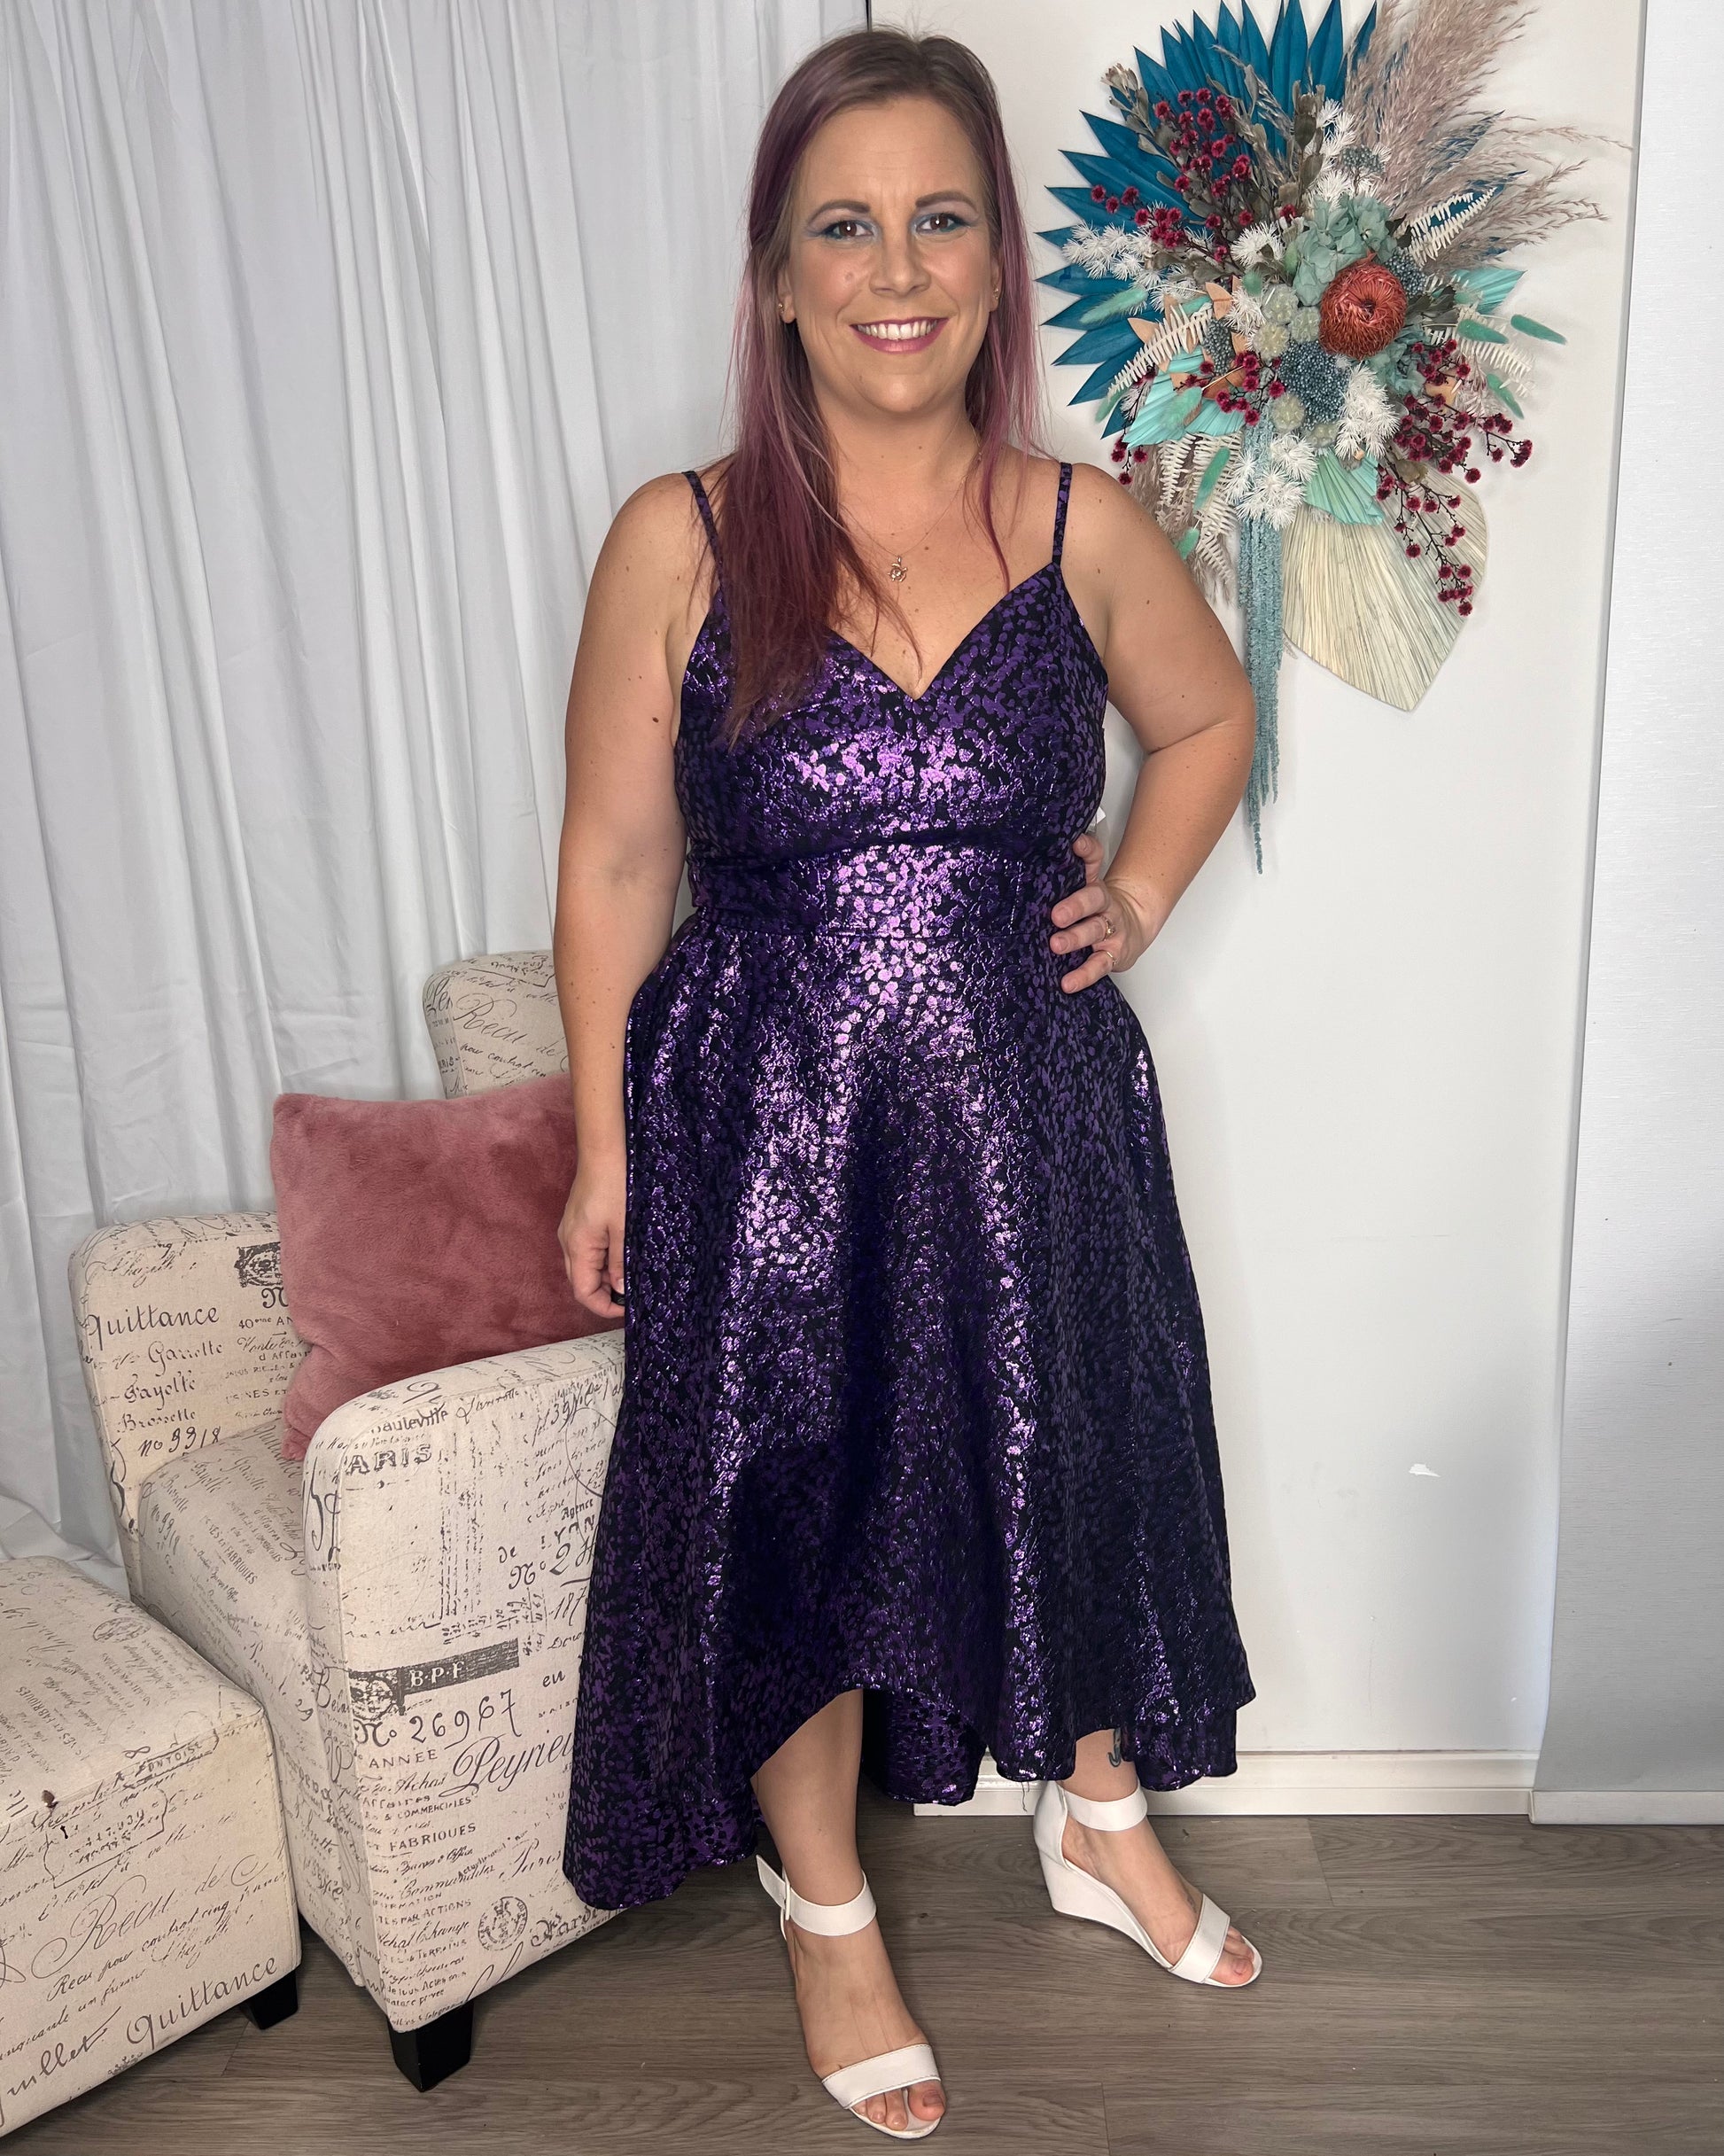 Aubrey Foil Print Cocktail Dress: The Aubrey Dress is sure to turn heads at your next evening event, with the foil print throwing just a hint of sass. It is a high low style dress with a structure to - Ciao Bella Dresses - Goddiva